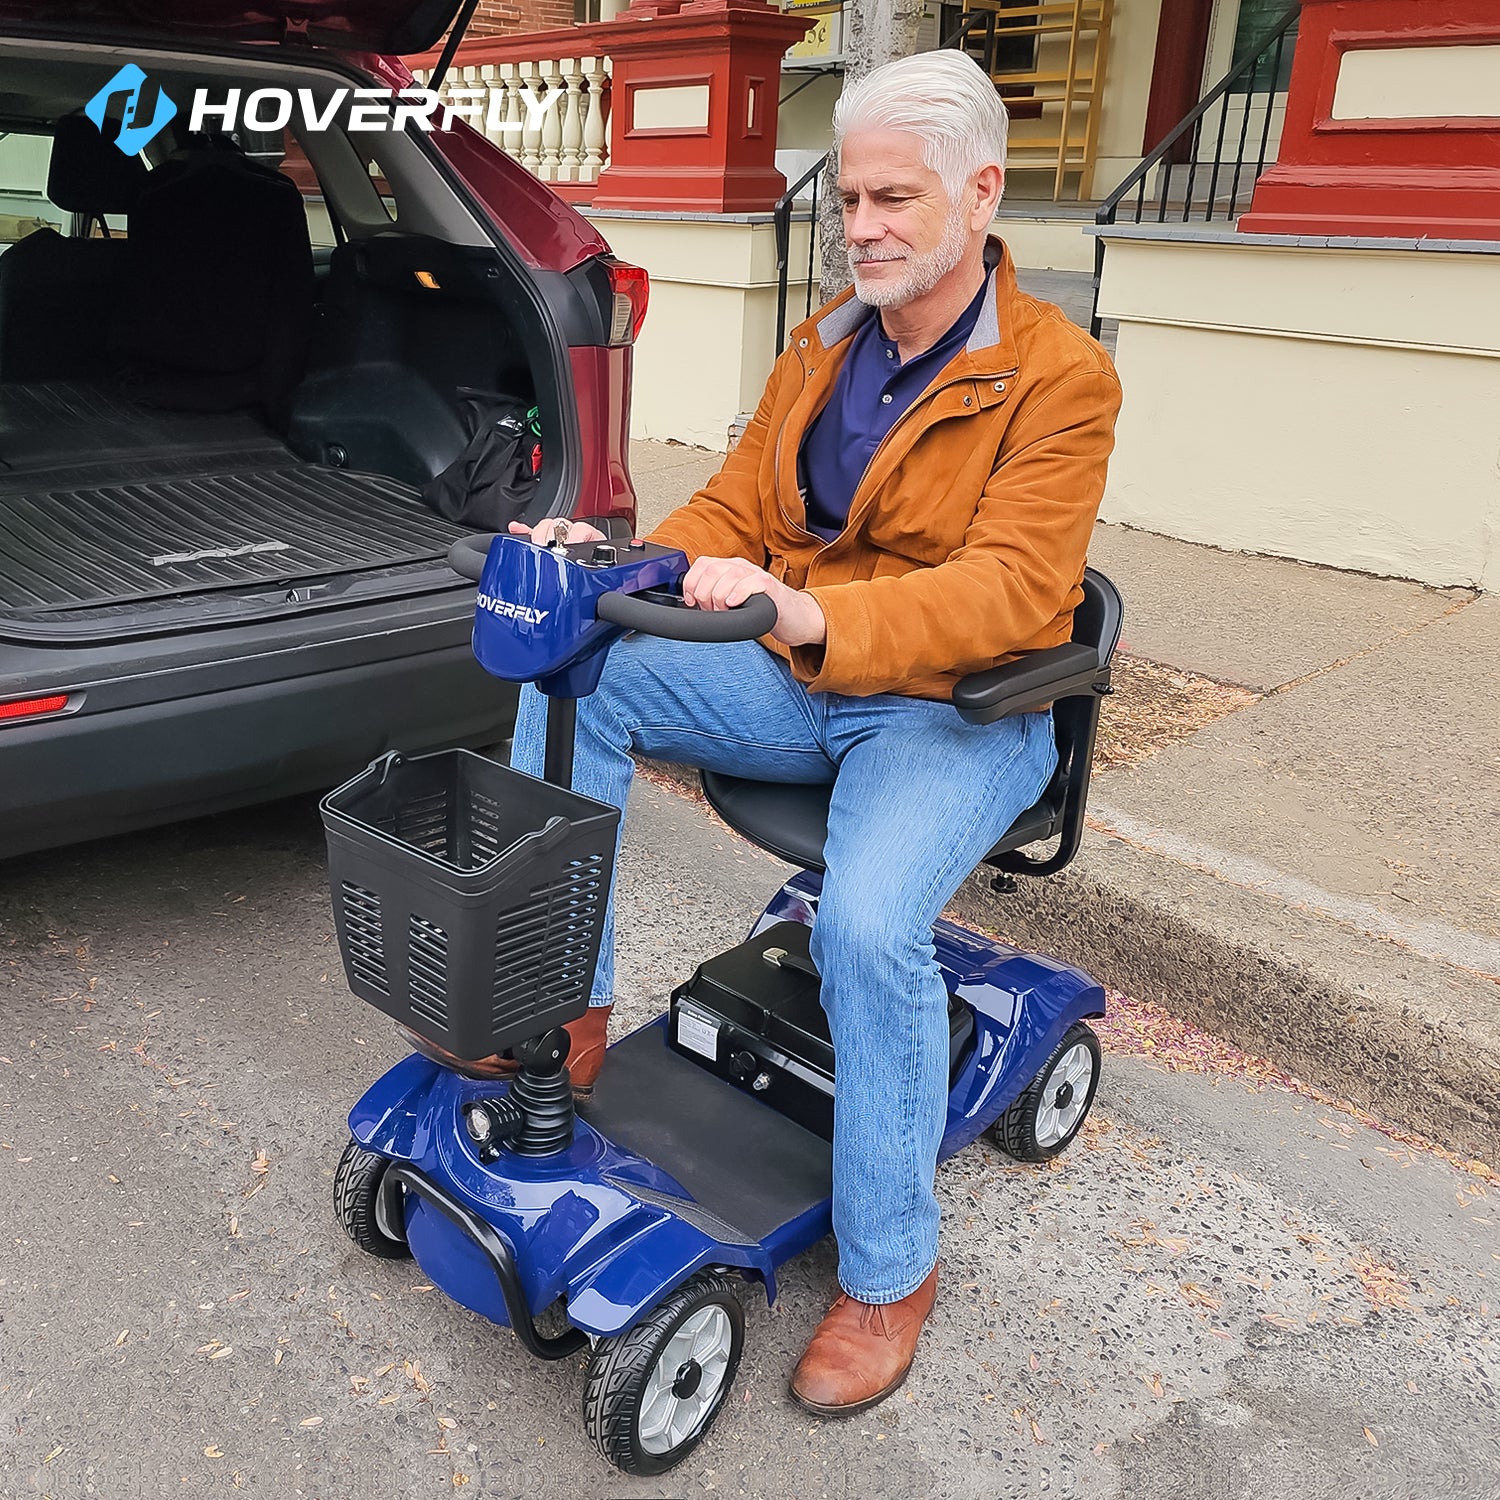 Elderly Gentleman Masterfully Navigates Blue Hoverfly T4 Scooter in Urban Jungle, Boasting Multifunctionality & Urban Comfort.